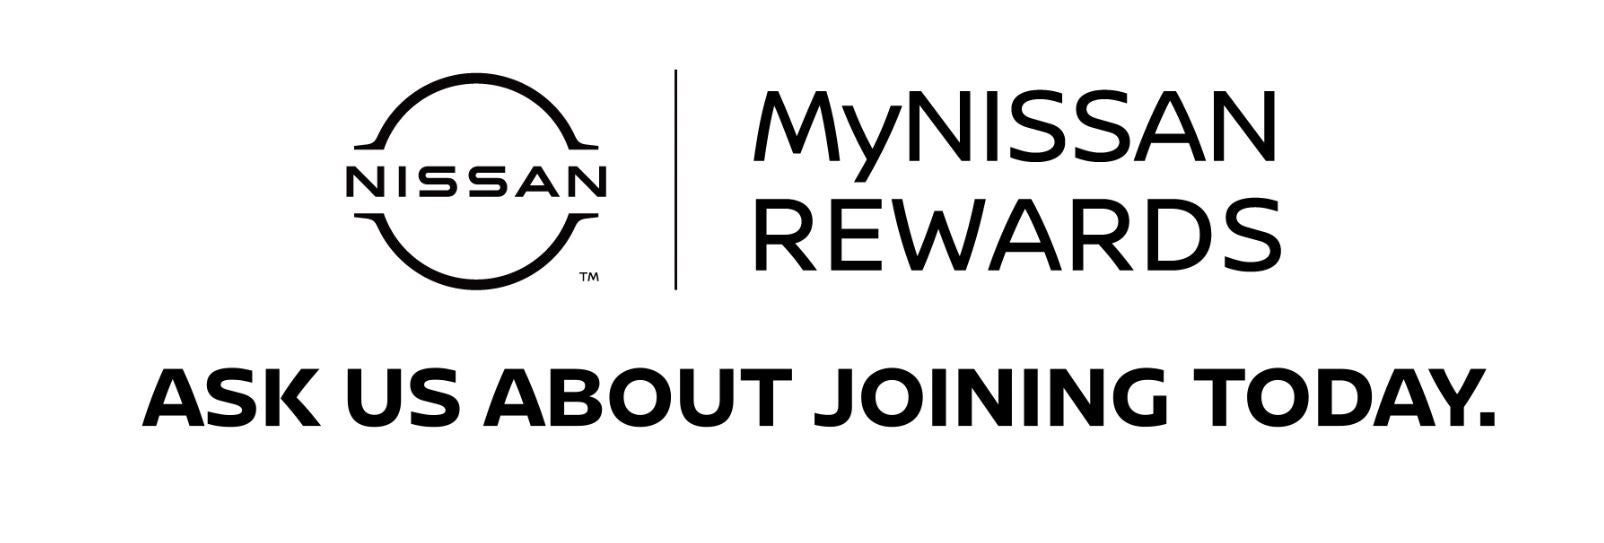 Earn and Save with MyNissan Rewards | Fort Collins Nissan in Fort Collins CO